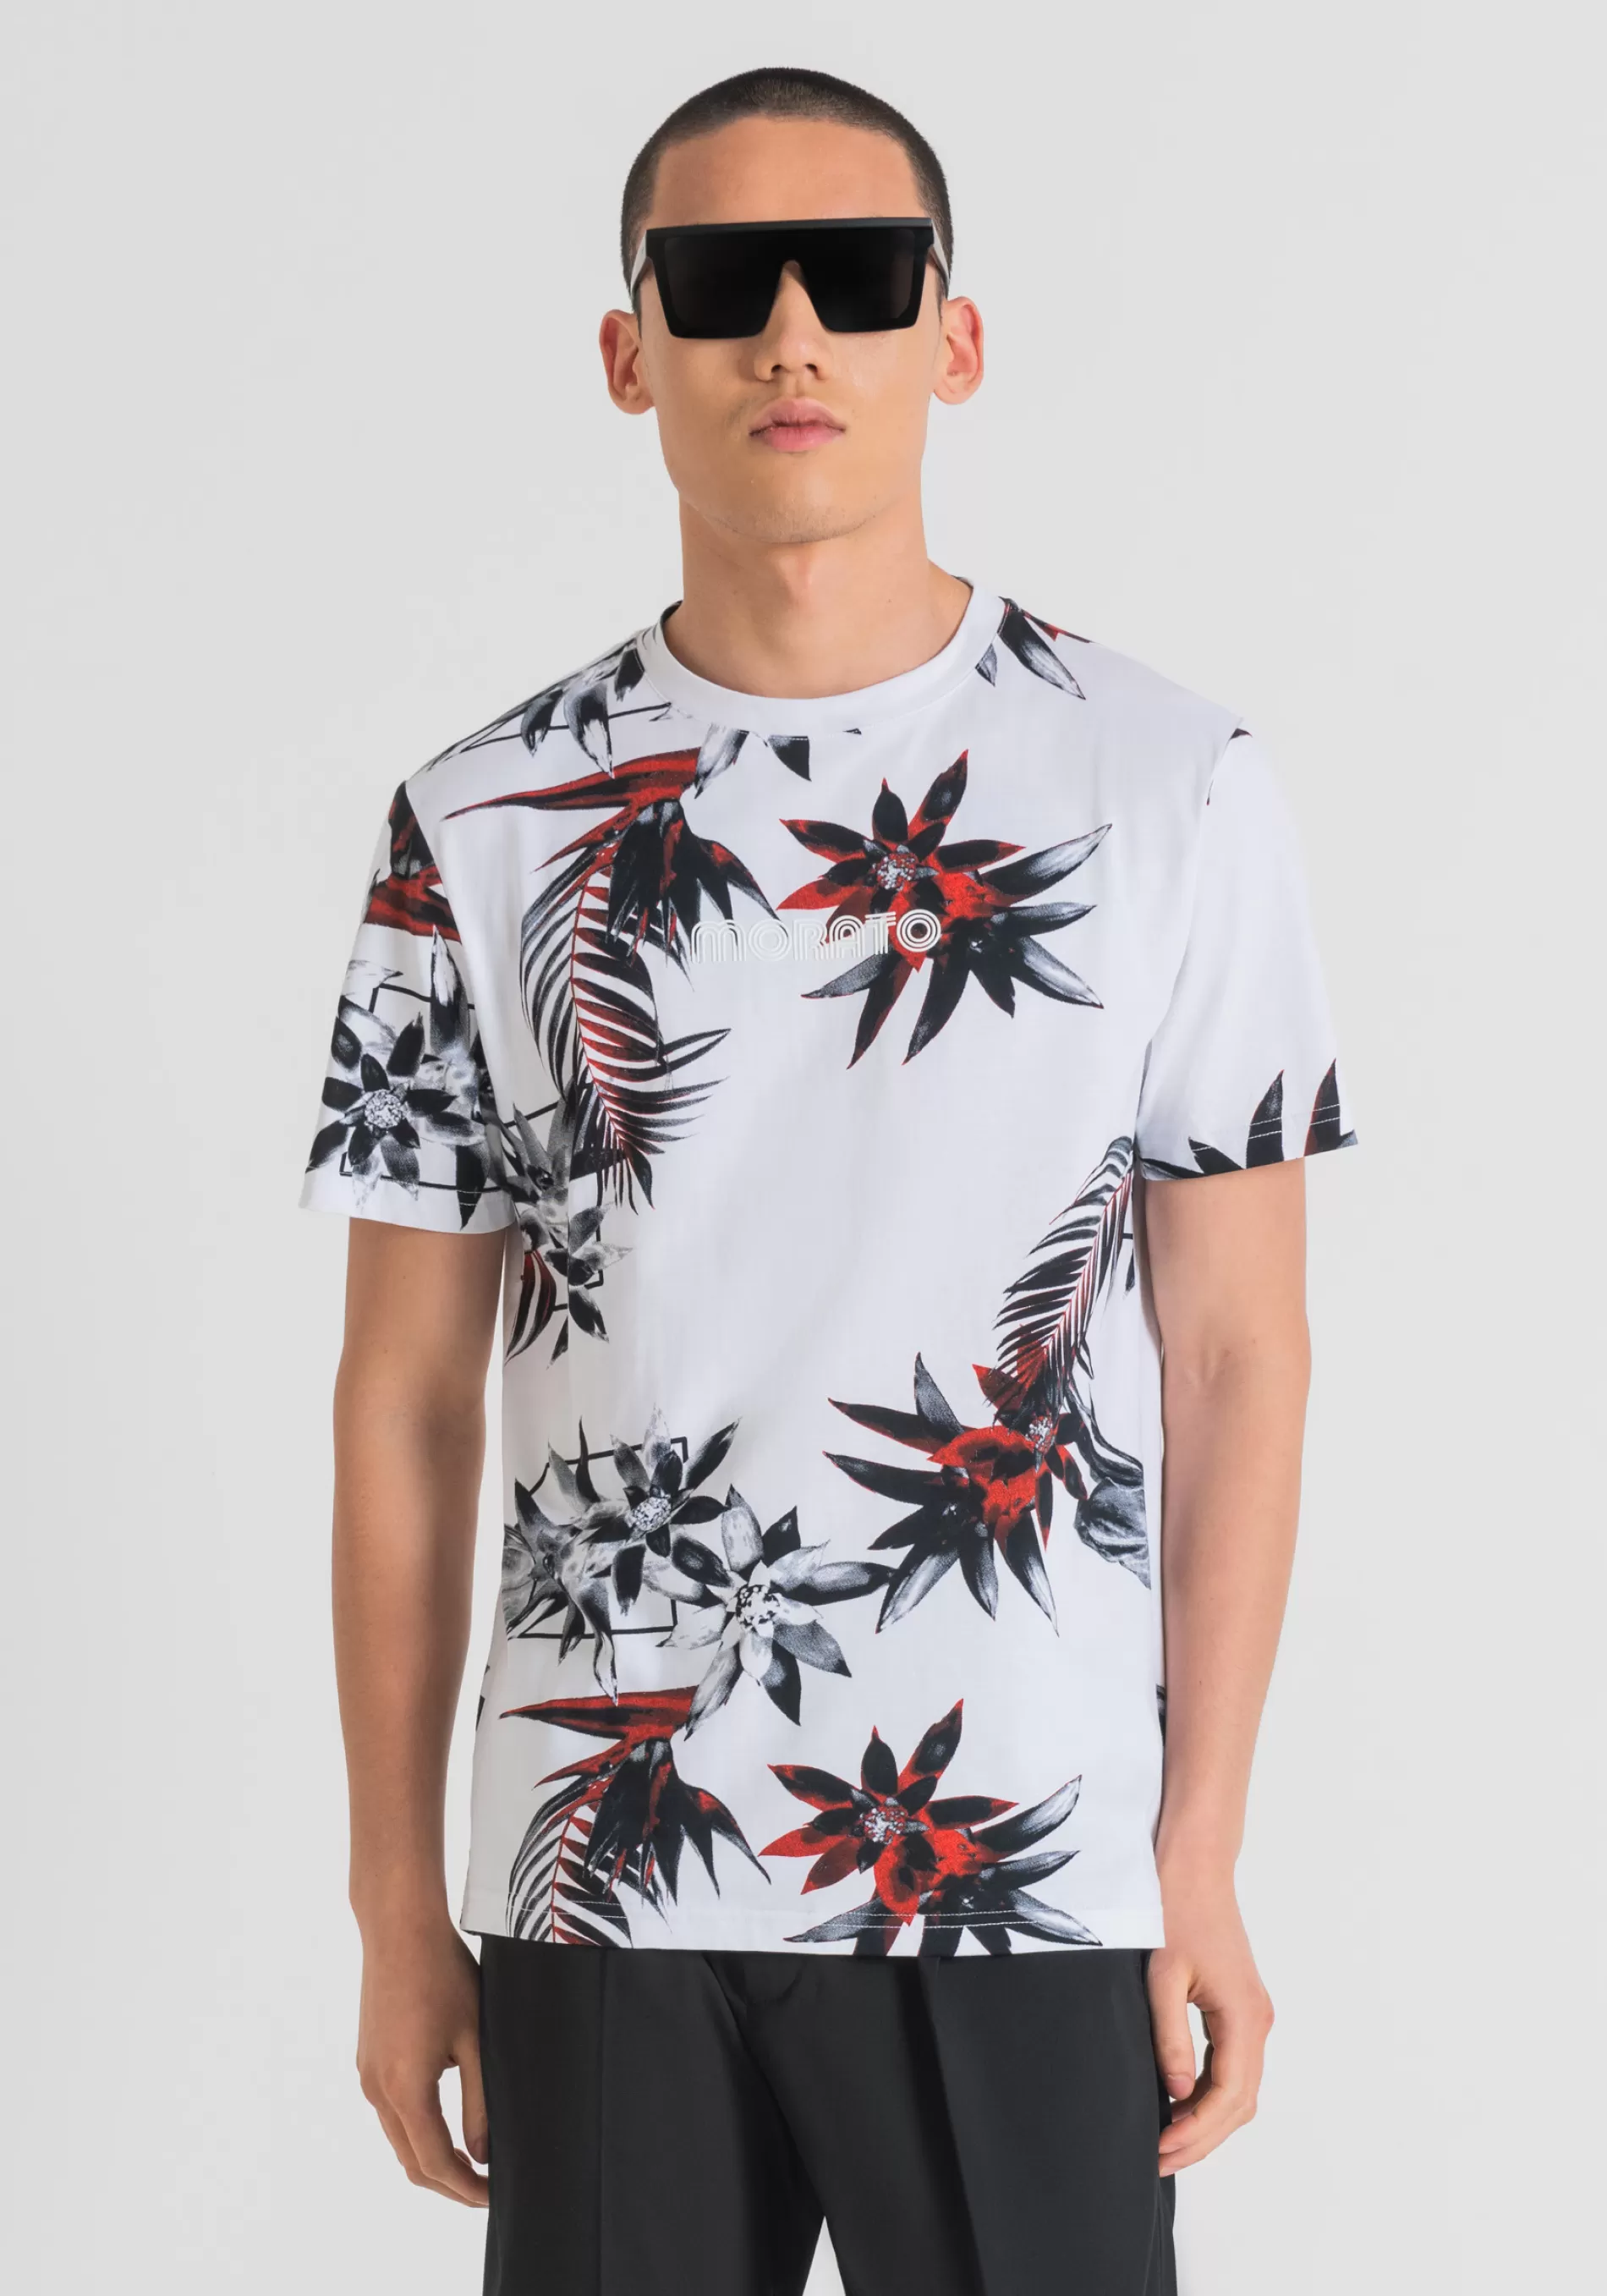 Shop REGULAR FIT T-SHIRT IN COTTON JERSEY WITH ALL-OVER FLORAL PRINT T-shirts and Polo